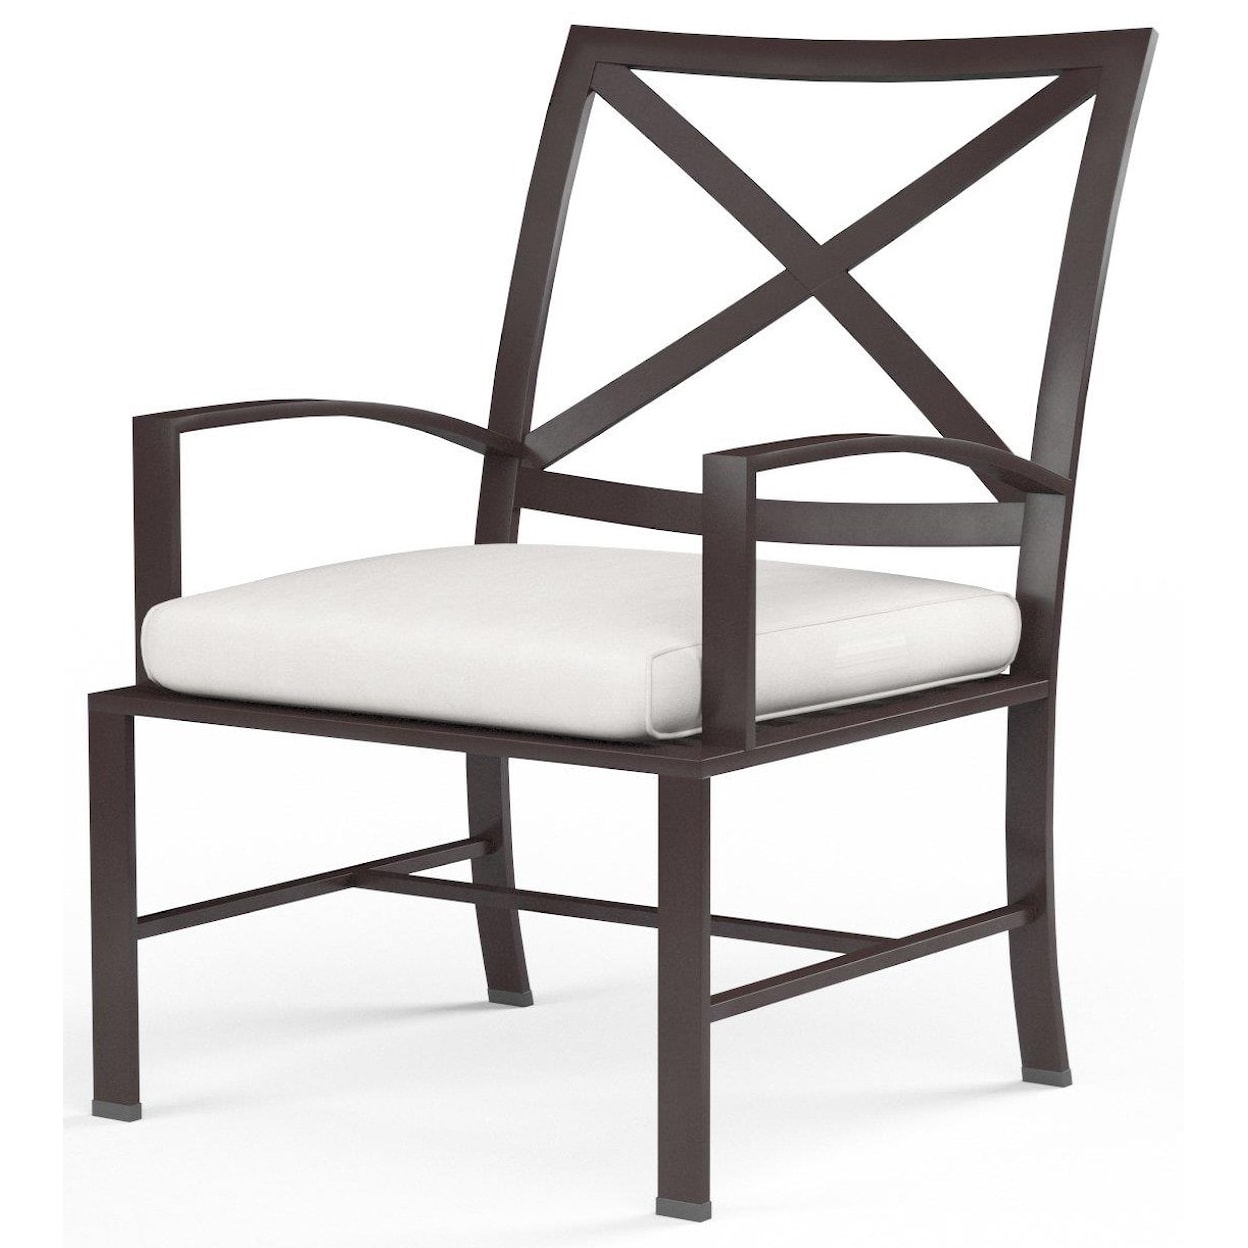 Sunset West La Jolla Outdoor Dining Chair